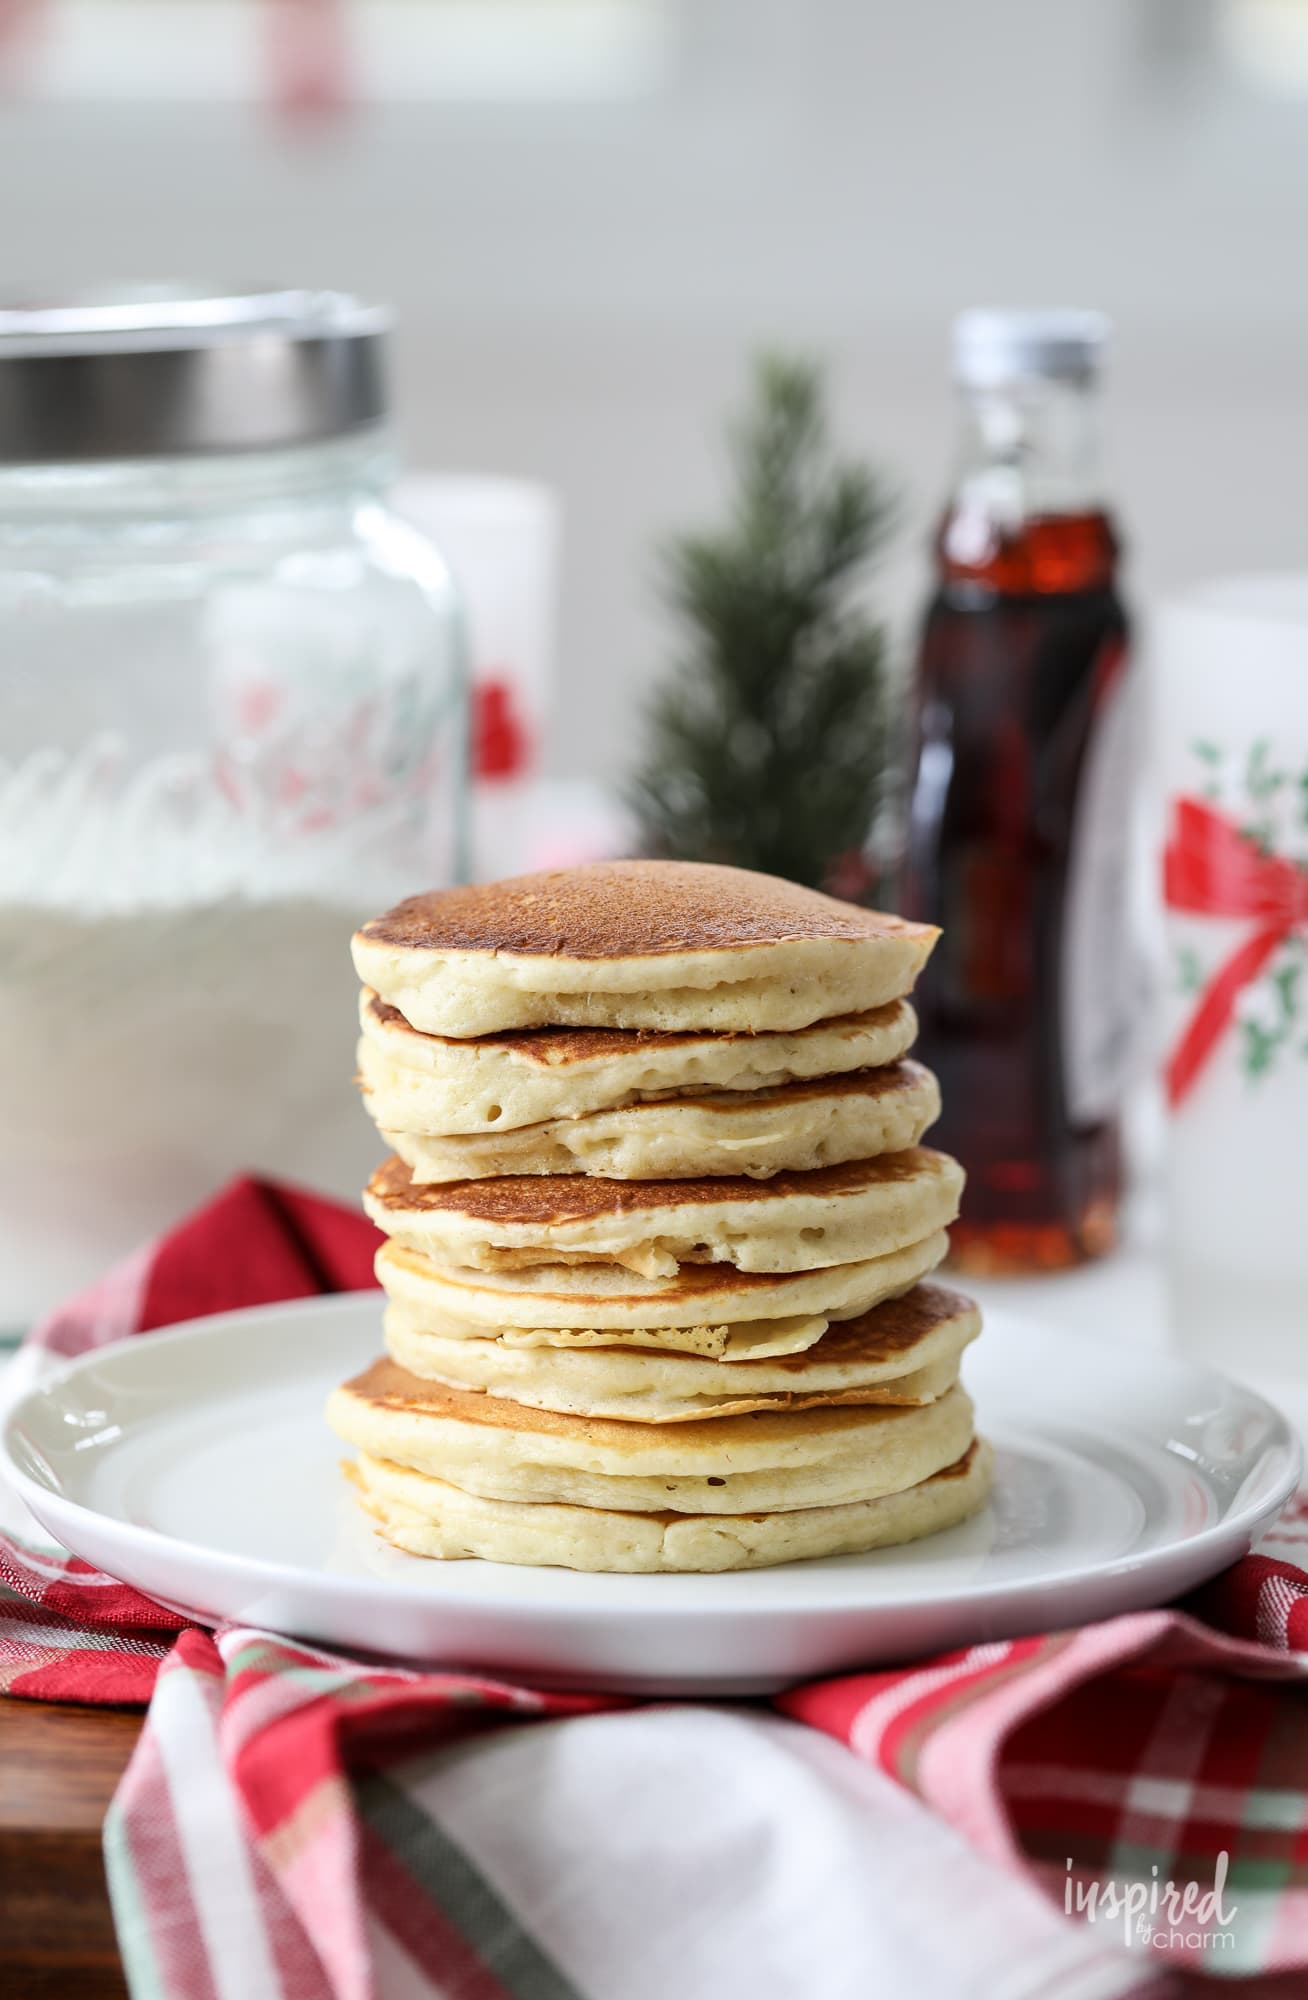 Learn how to make this easy and delicious Homemade Pancake Mix. #homemade #pancake #mix #breakfast #recipe #pancakes #gift #handmade